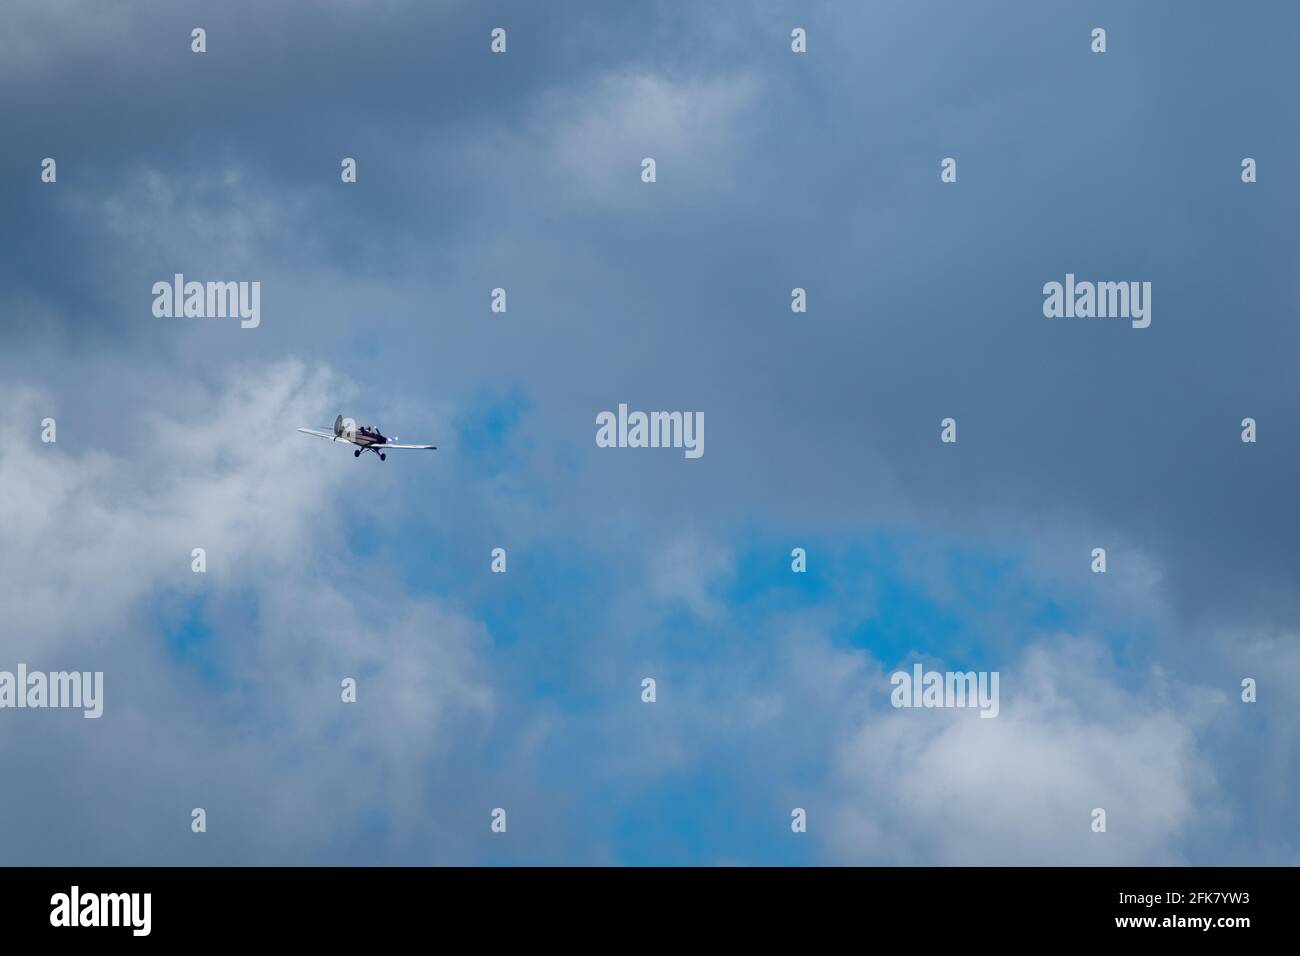 A single engine airplane flies in a cloudy sky over Pumicestone Passage, Queensland, Australia Stock Photo